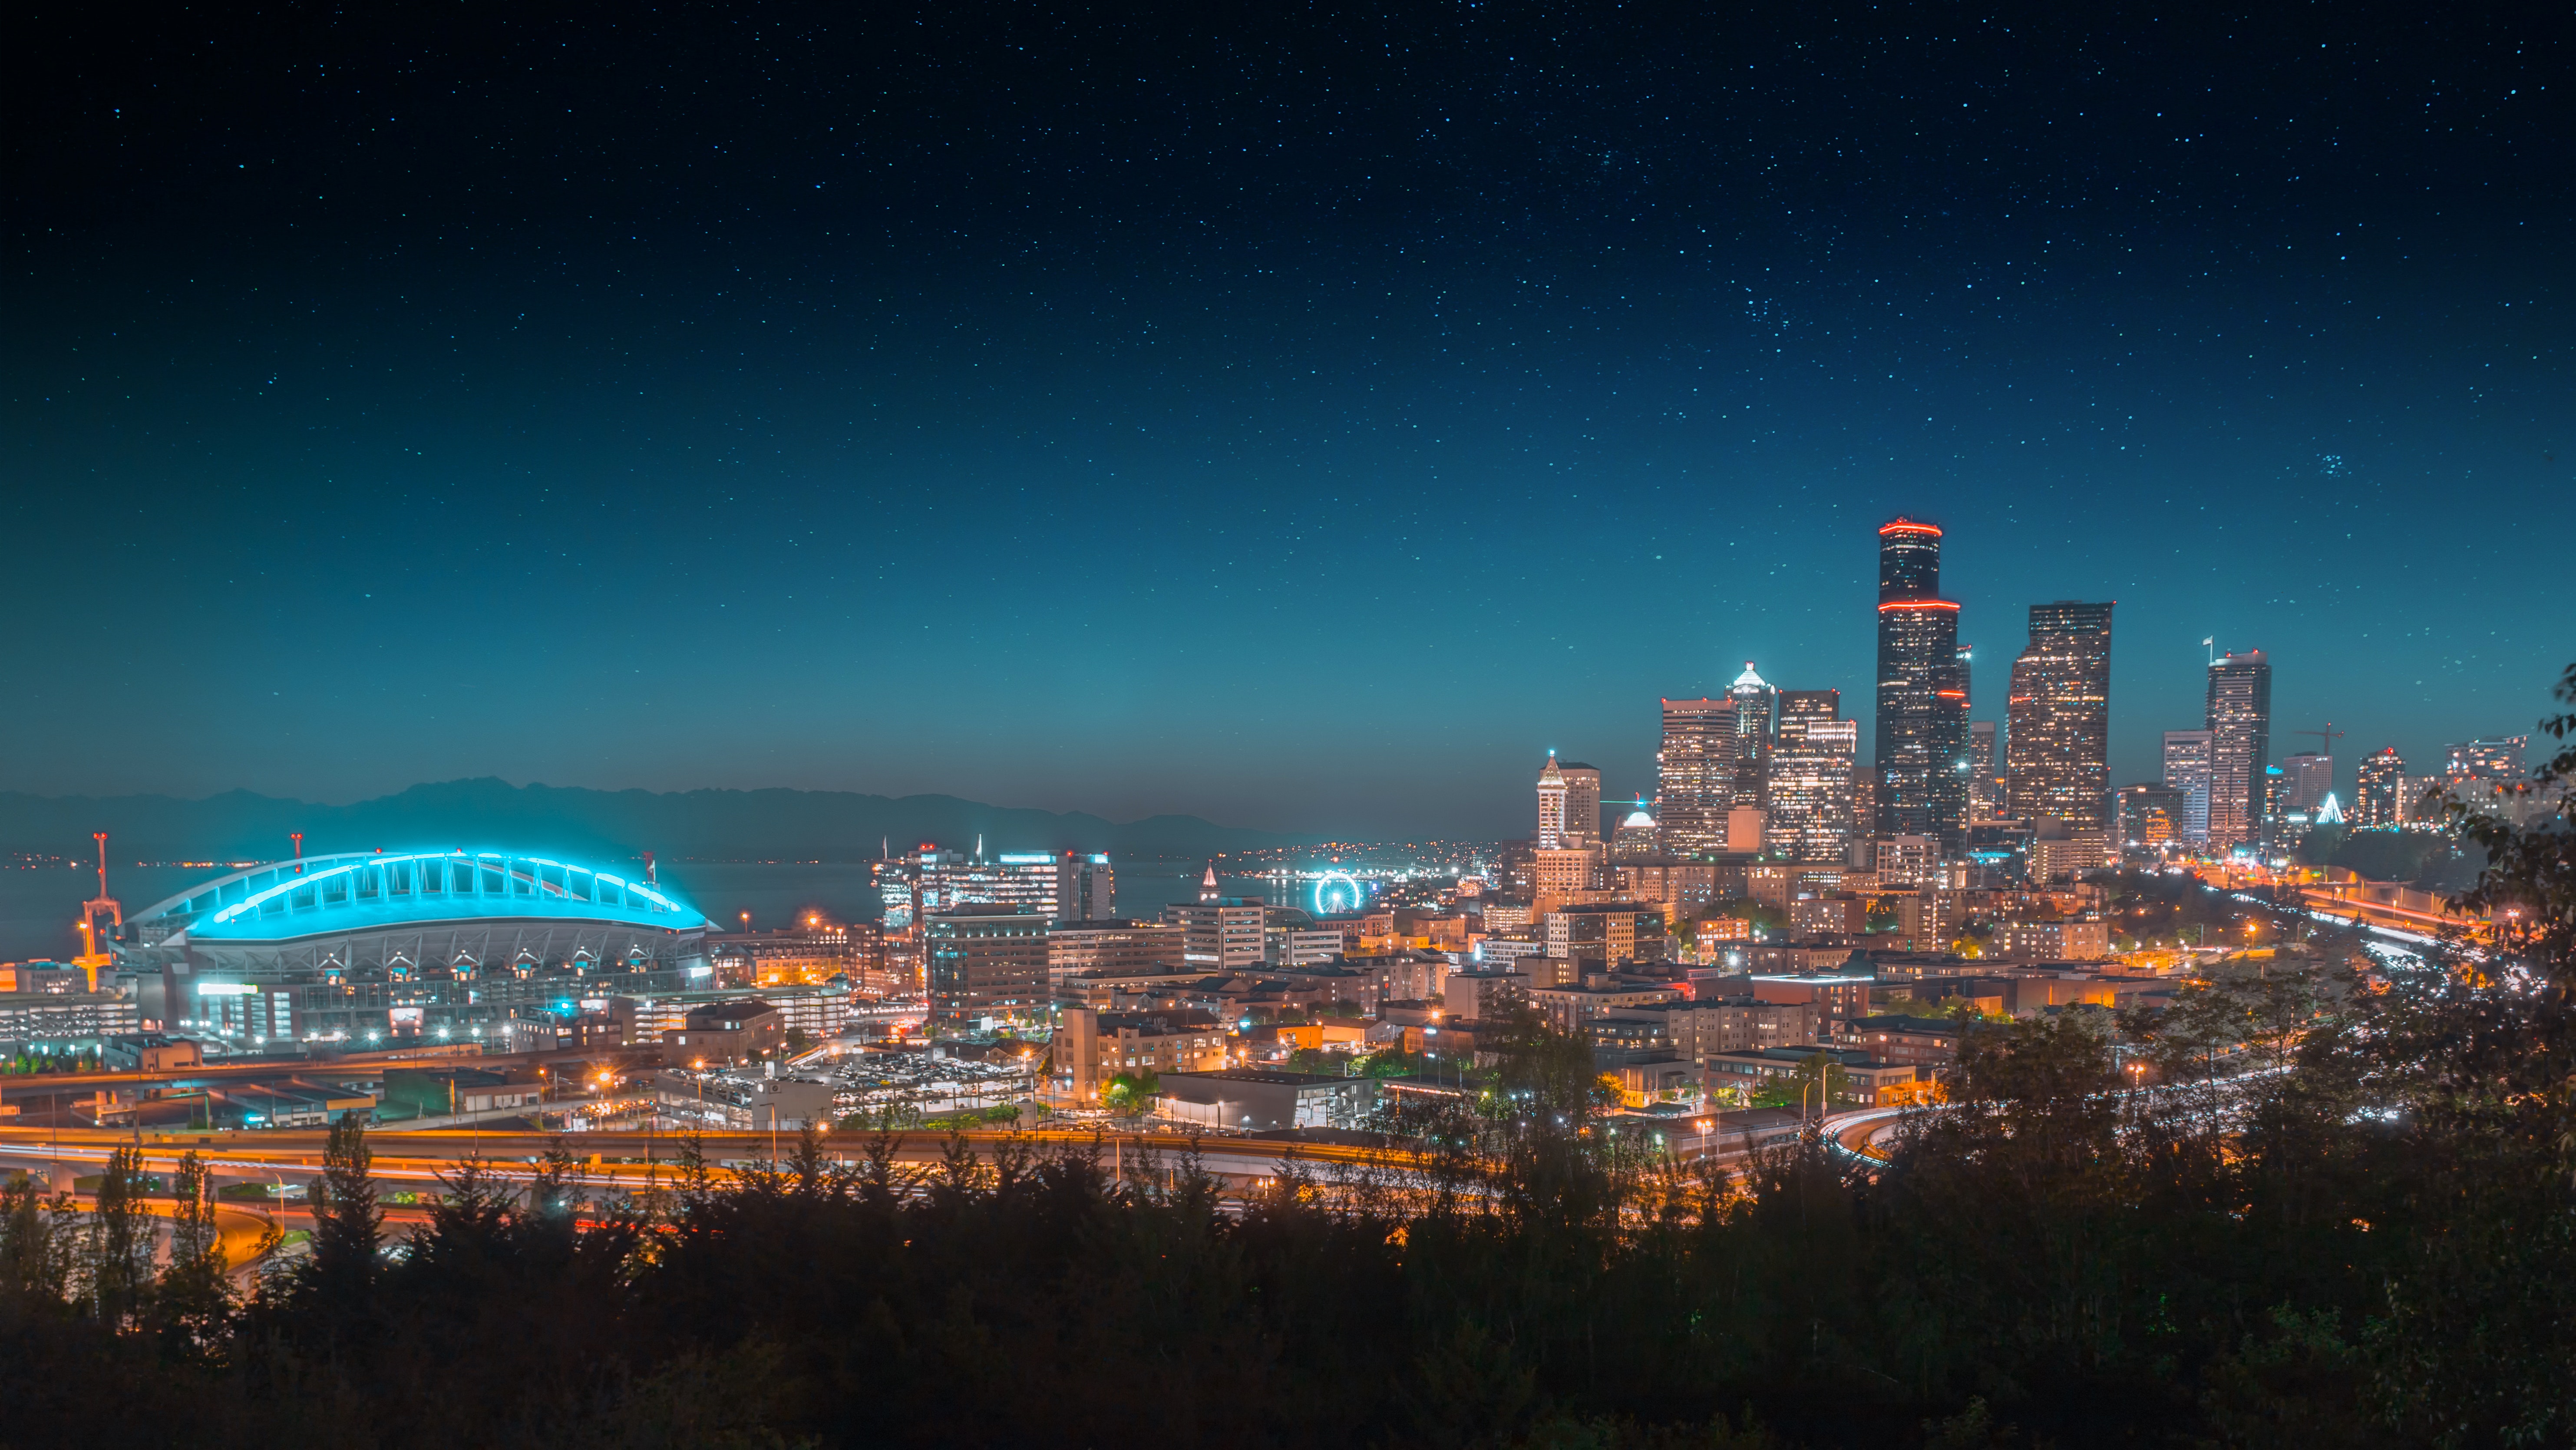 1920x1080 Background cities, architecture, starry sky, night city, city lights, panorama